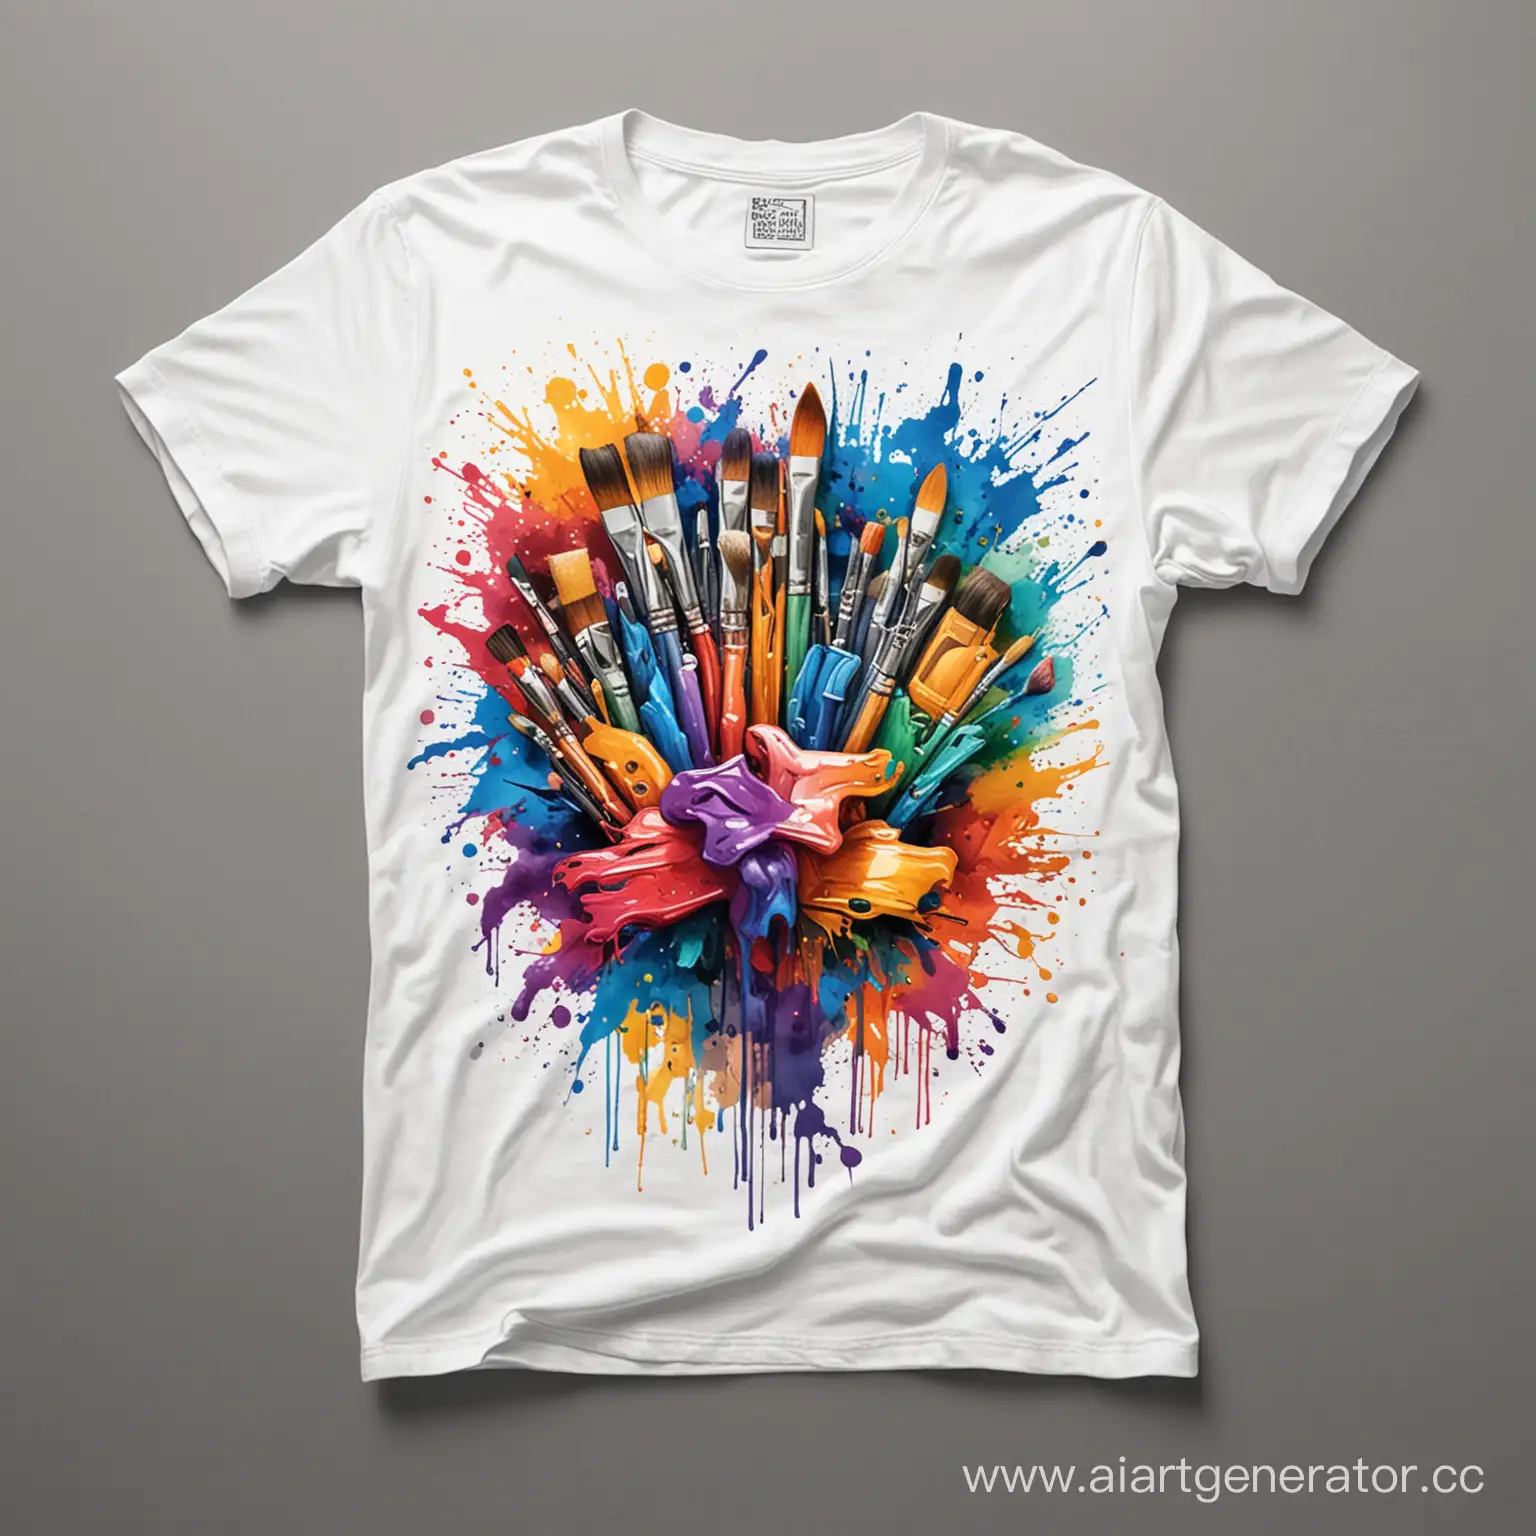 Vibrant-Artistic-Tshirt-with-Paintbrush-and-Palette-Motif